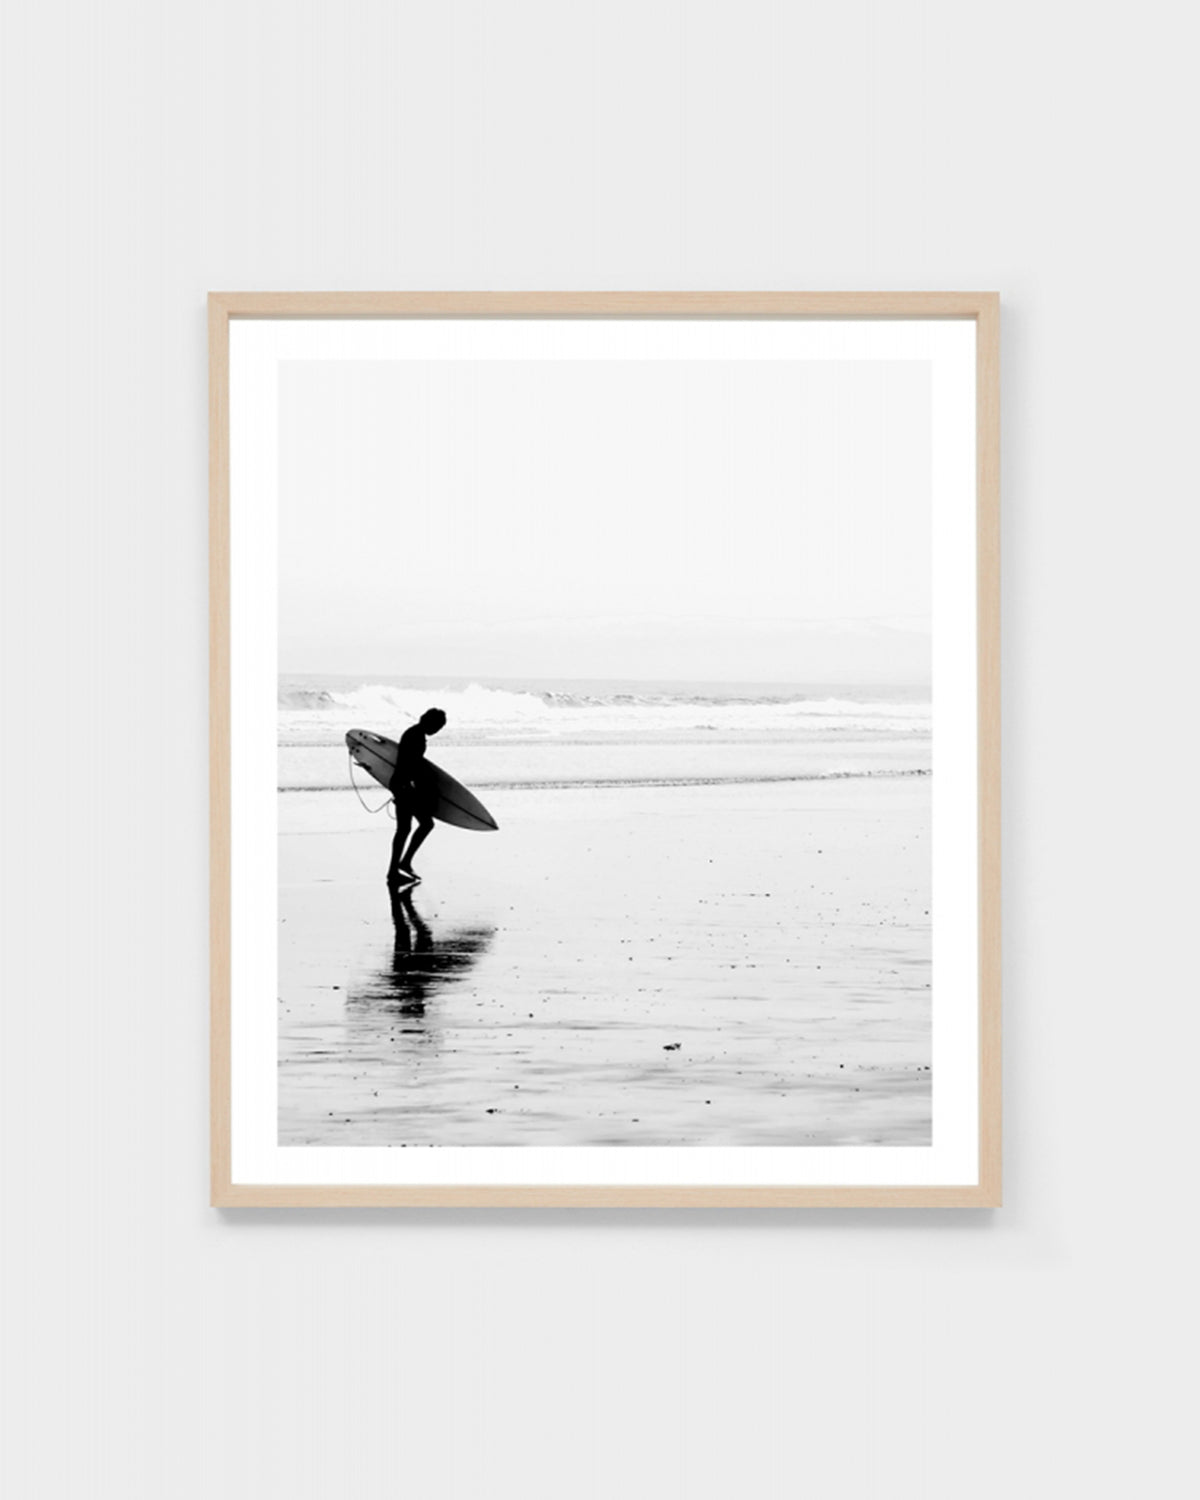 A stunning monochrome coastal print that will make a statement in any young surfer's room.  This Morning Surf framed print comes with a white (unprinted) 5.5cm border on all sides around the artwork.  Timber frame, glass, engineered wood backing.